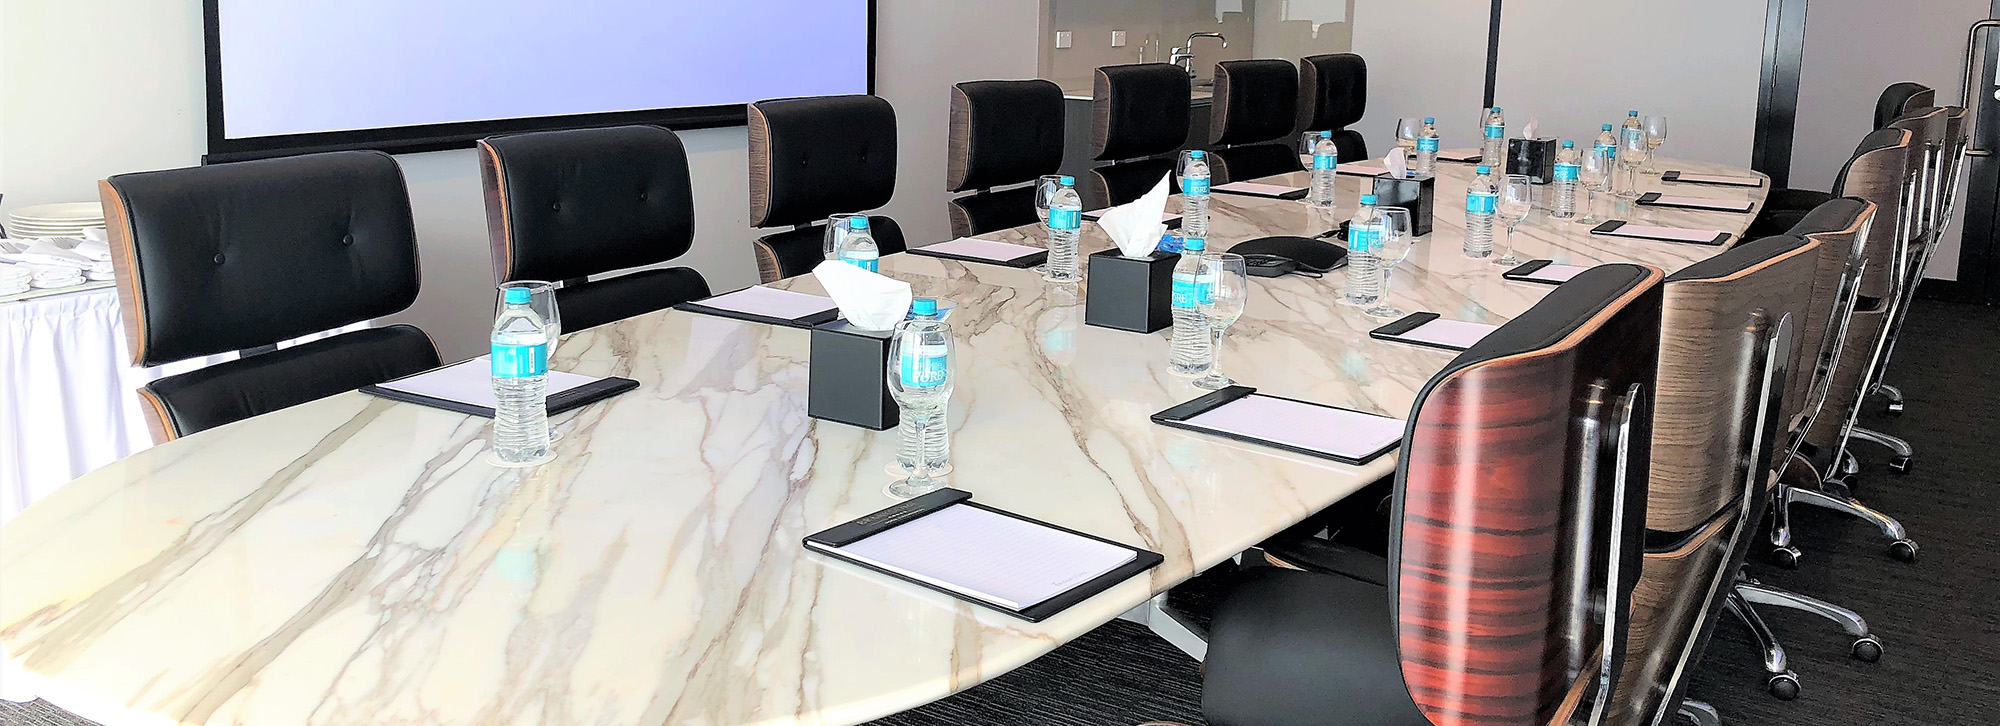 Board Room configuration for up to 14